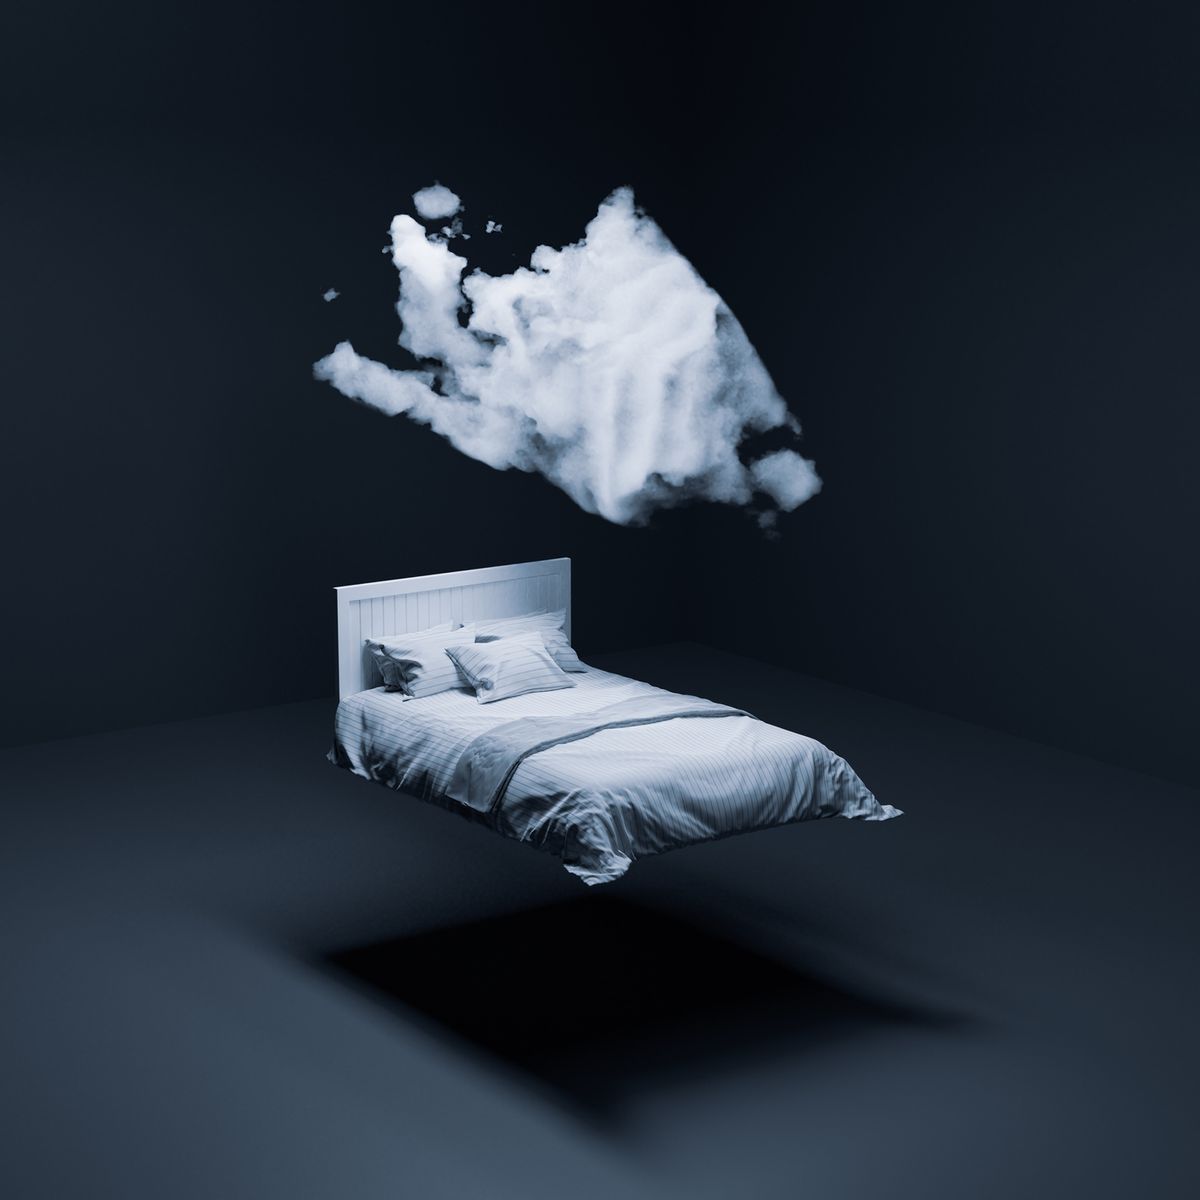 digitally generated image of a floating white bed and cloud in a dark grey room